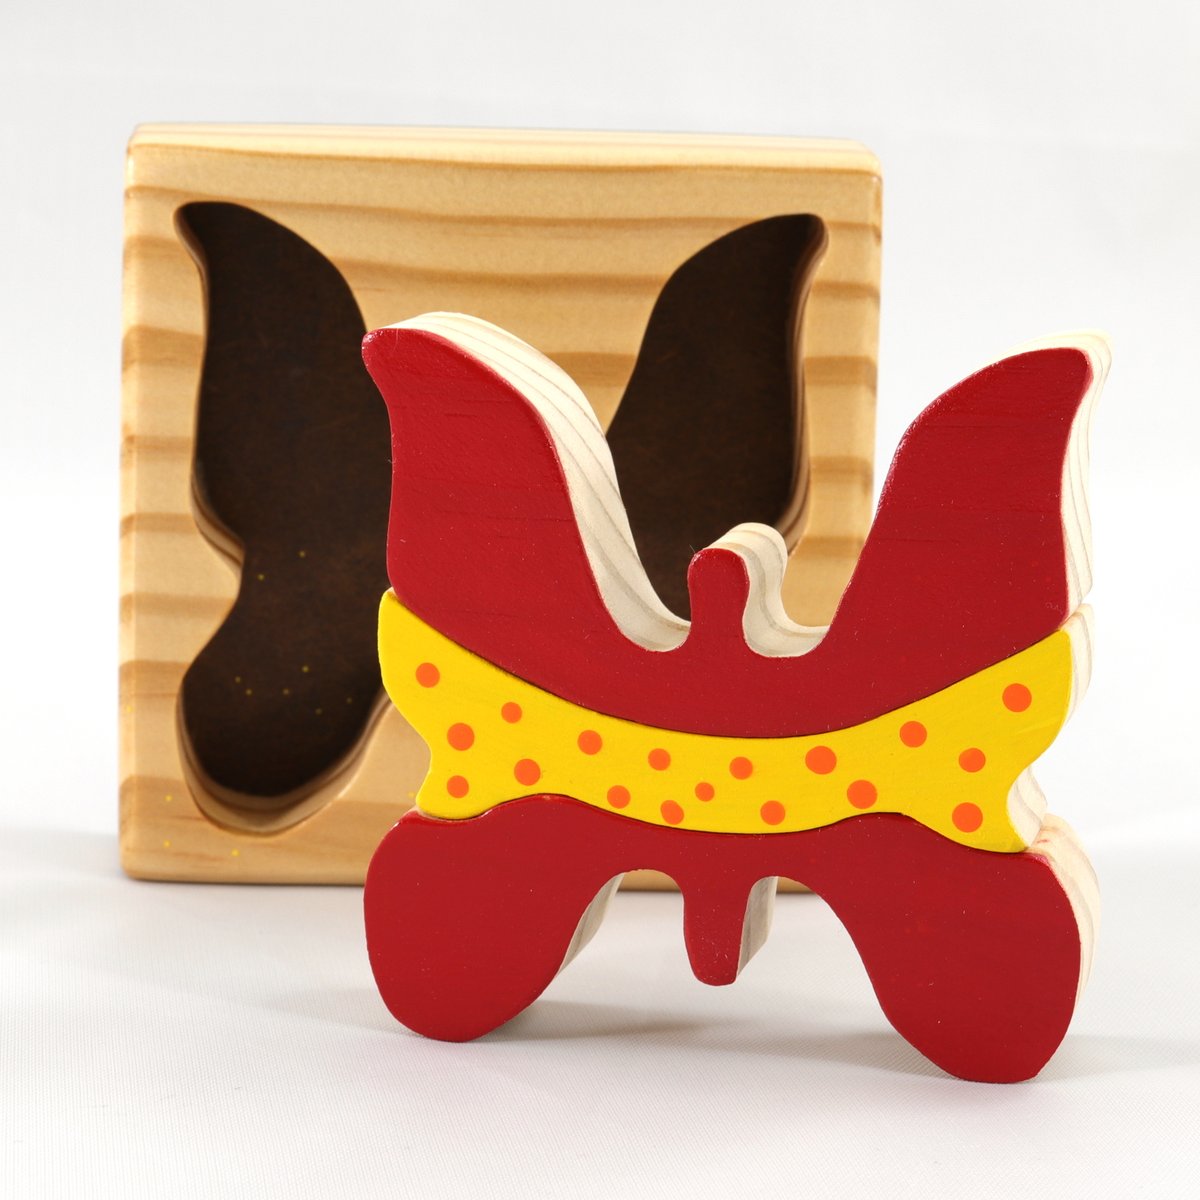 Wooden Butterfly Puzzle Handmade And Painted Bright Red and Yellow With Orange Spots One of Four Puzzles In My Puzzle Pals Collection
Order This Puzzle: is.gd/qntxvZ
#odinstoyfactory #handmade #woodtoys #madeinusa #madeinamerica #goimagine